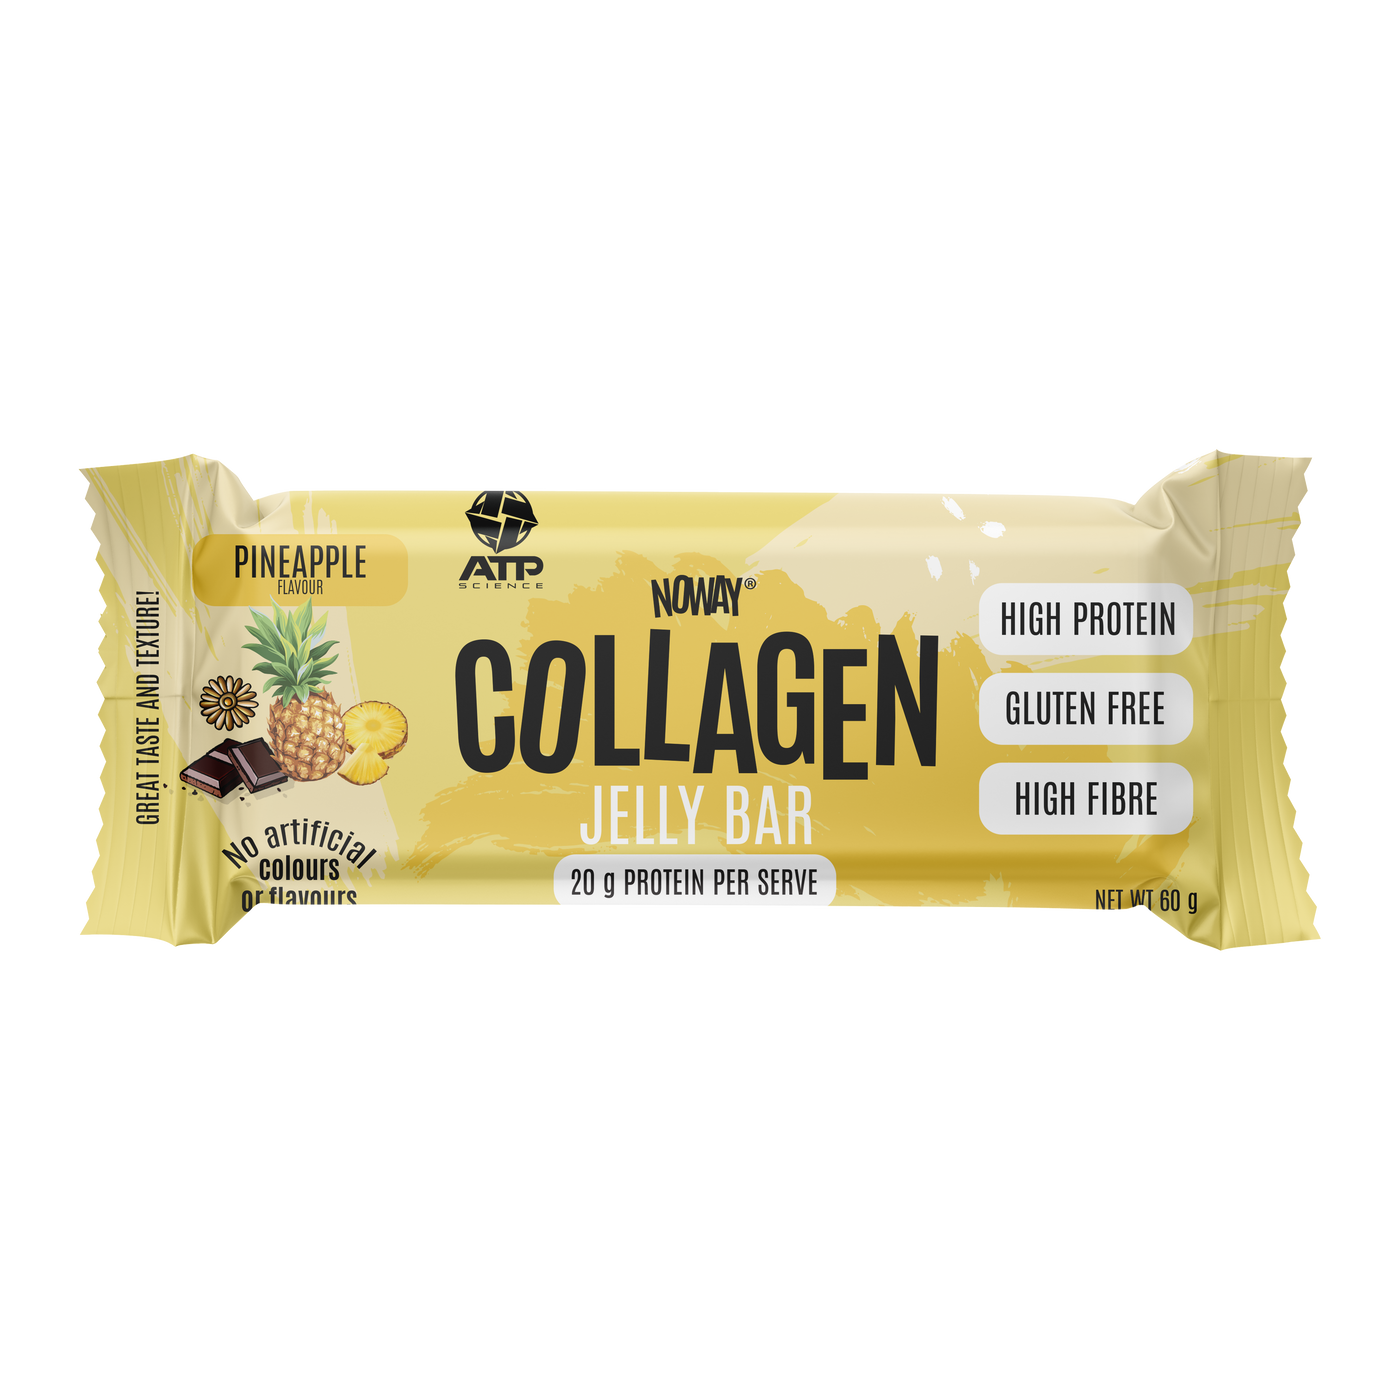 NOWAY Collagen Jelly Bar - Pineapple